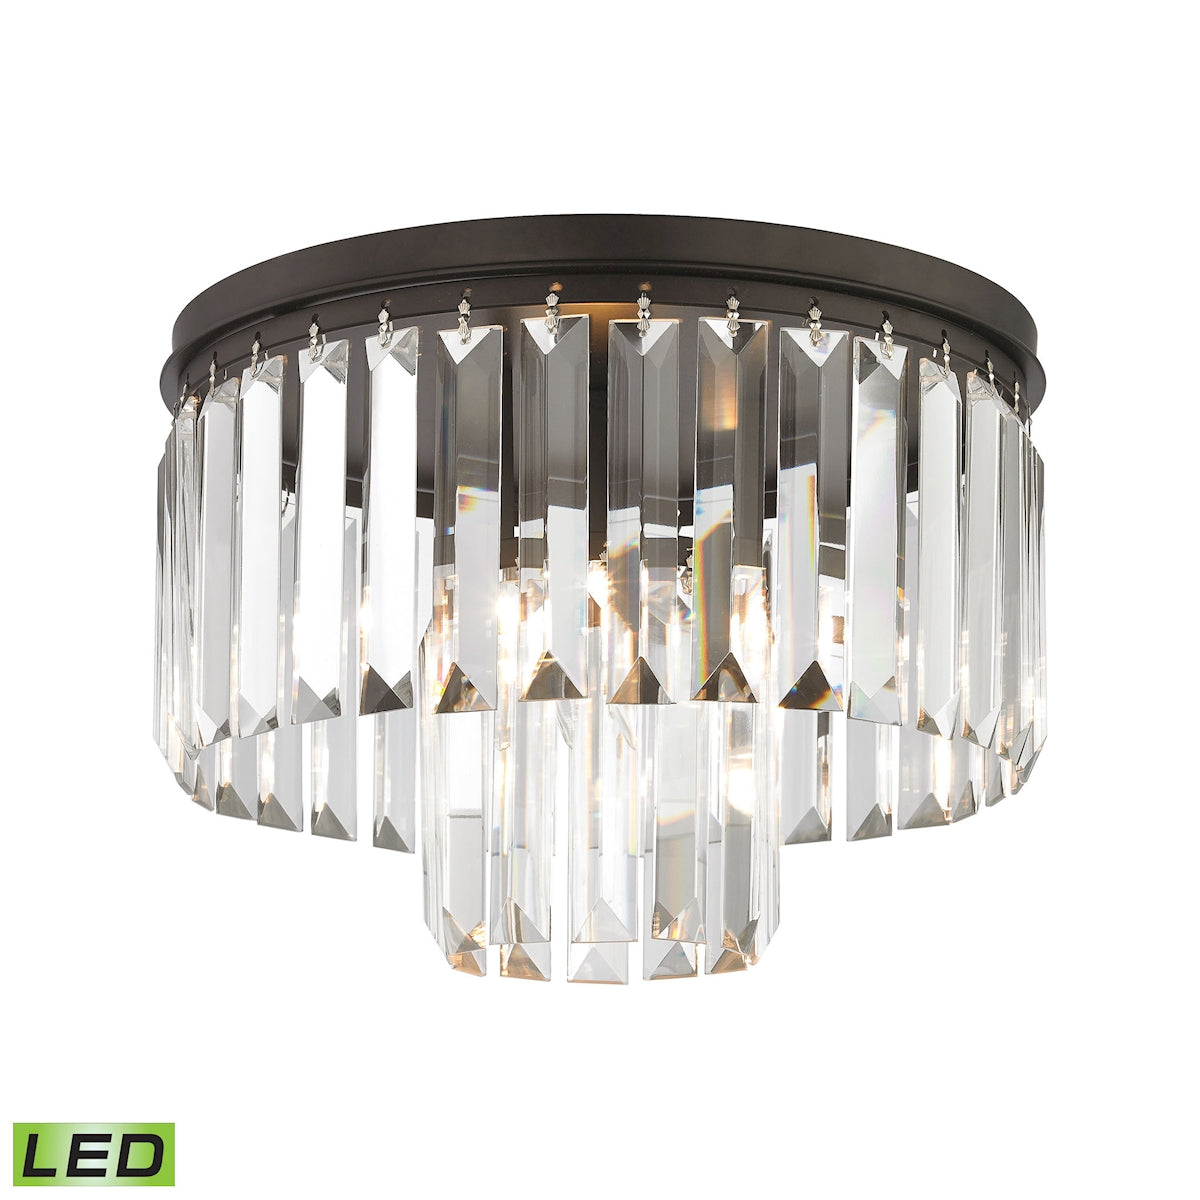 ELK Lighting 15223/1-LED Palacial 1-Light Semi Flush in Oil Rubbed Bronze with Clear Crystal - Includes LED Bulb